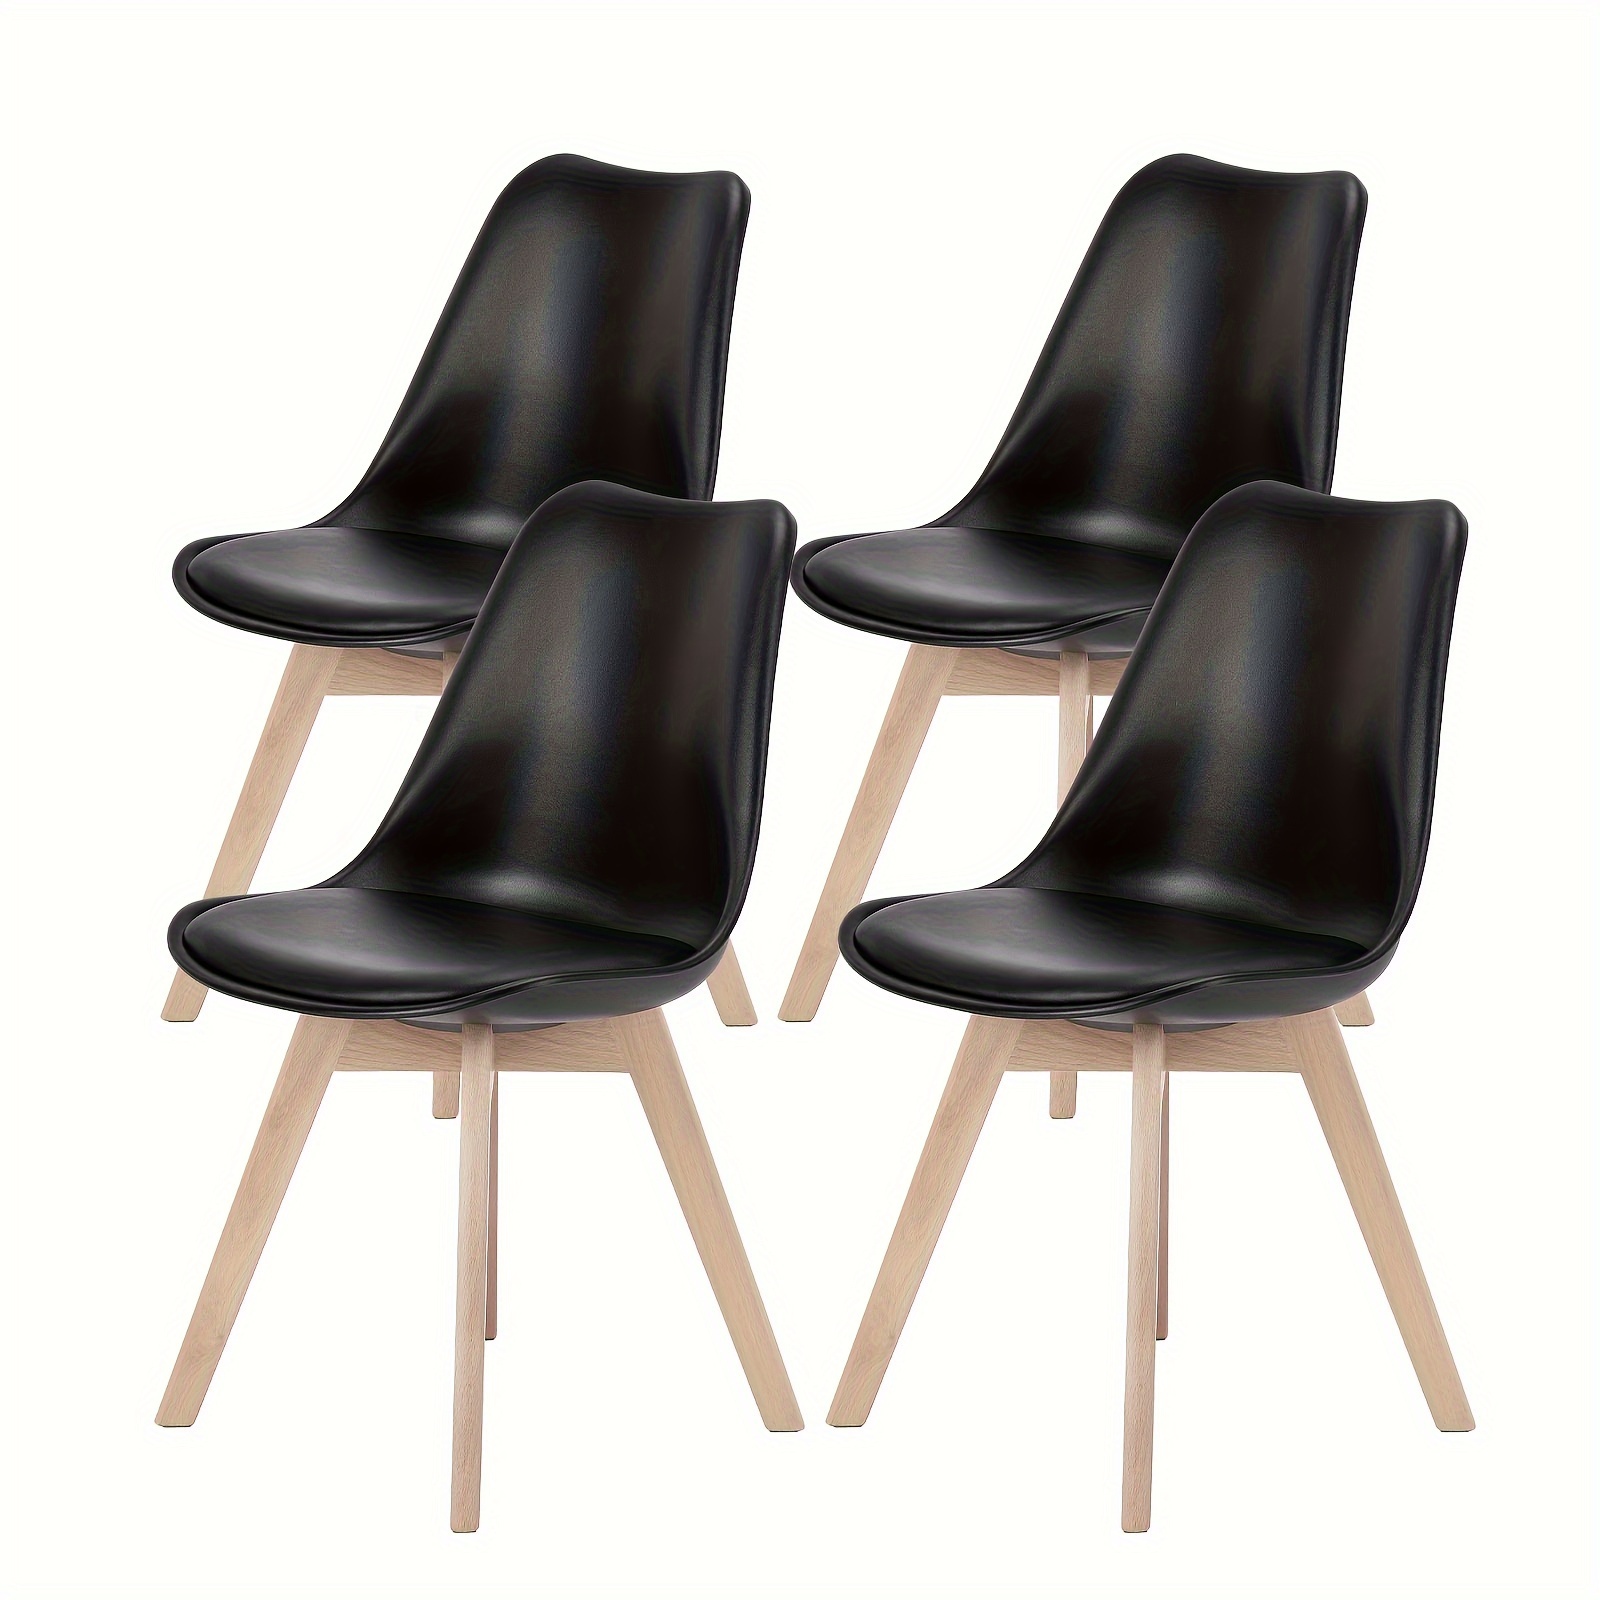 

Dining Chairs Set Of 4, Mid-century Modern Dining Chairs With Wood Legs And Pu Leather Cushion For Kitchen Living Room Bedroom Outdoor Lounge